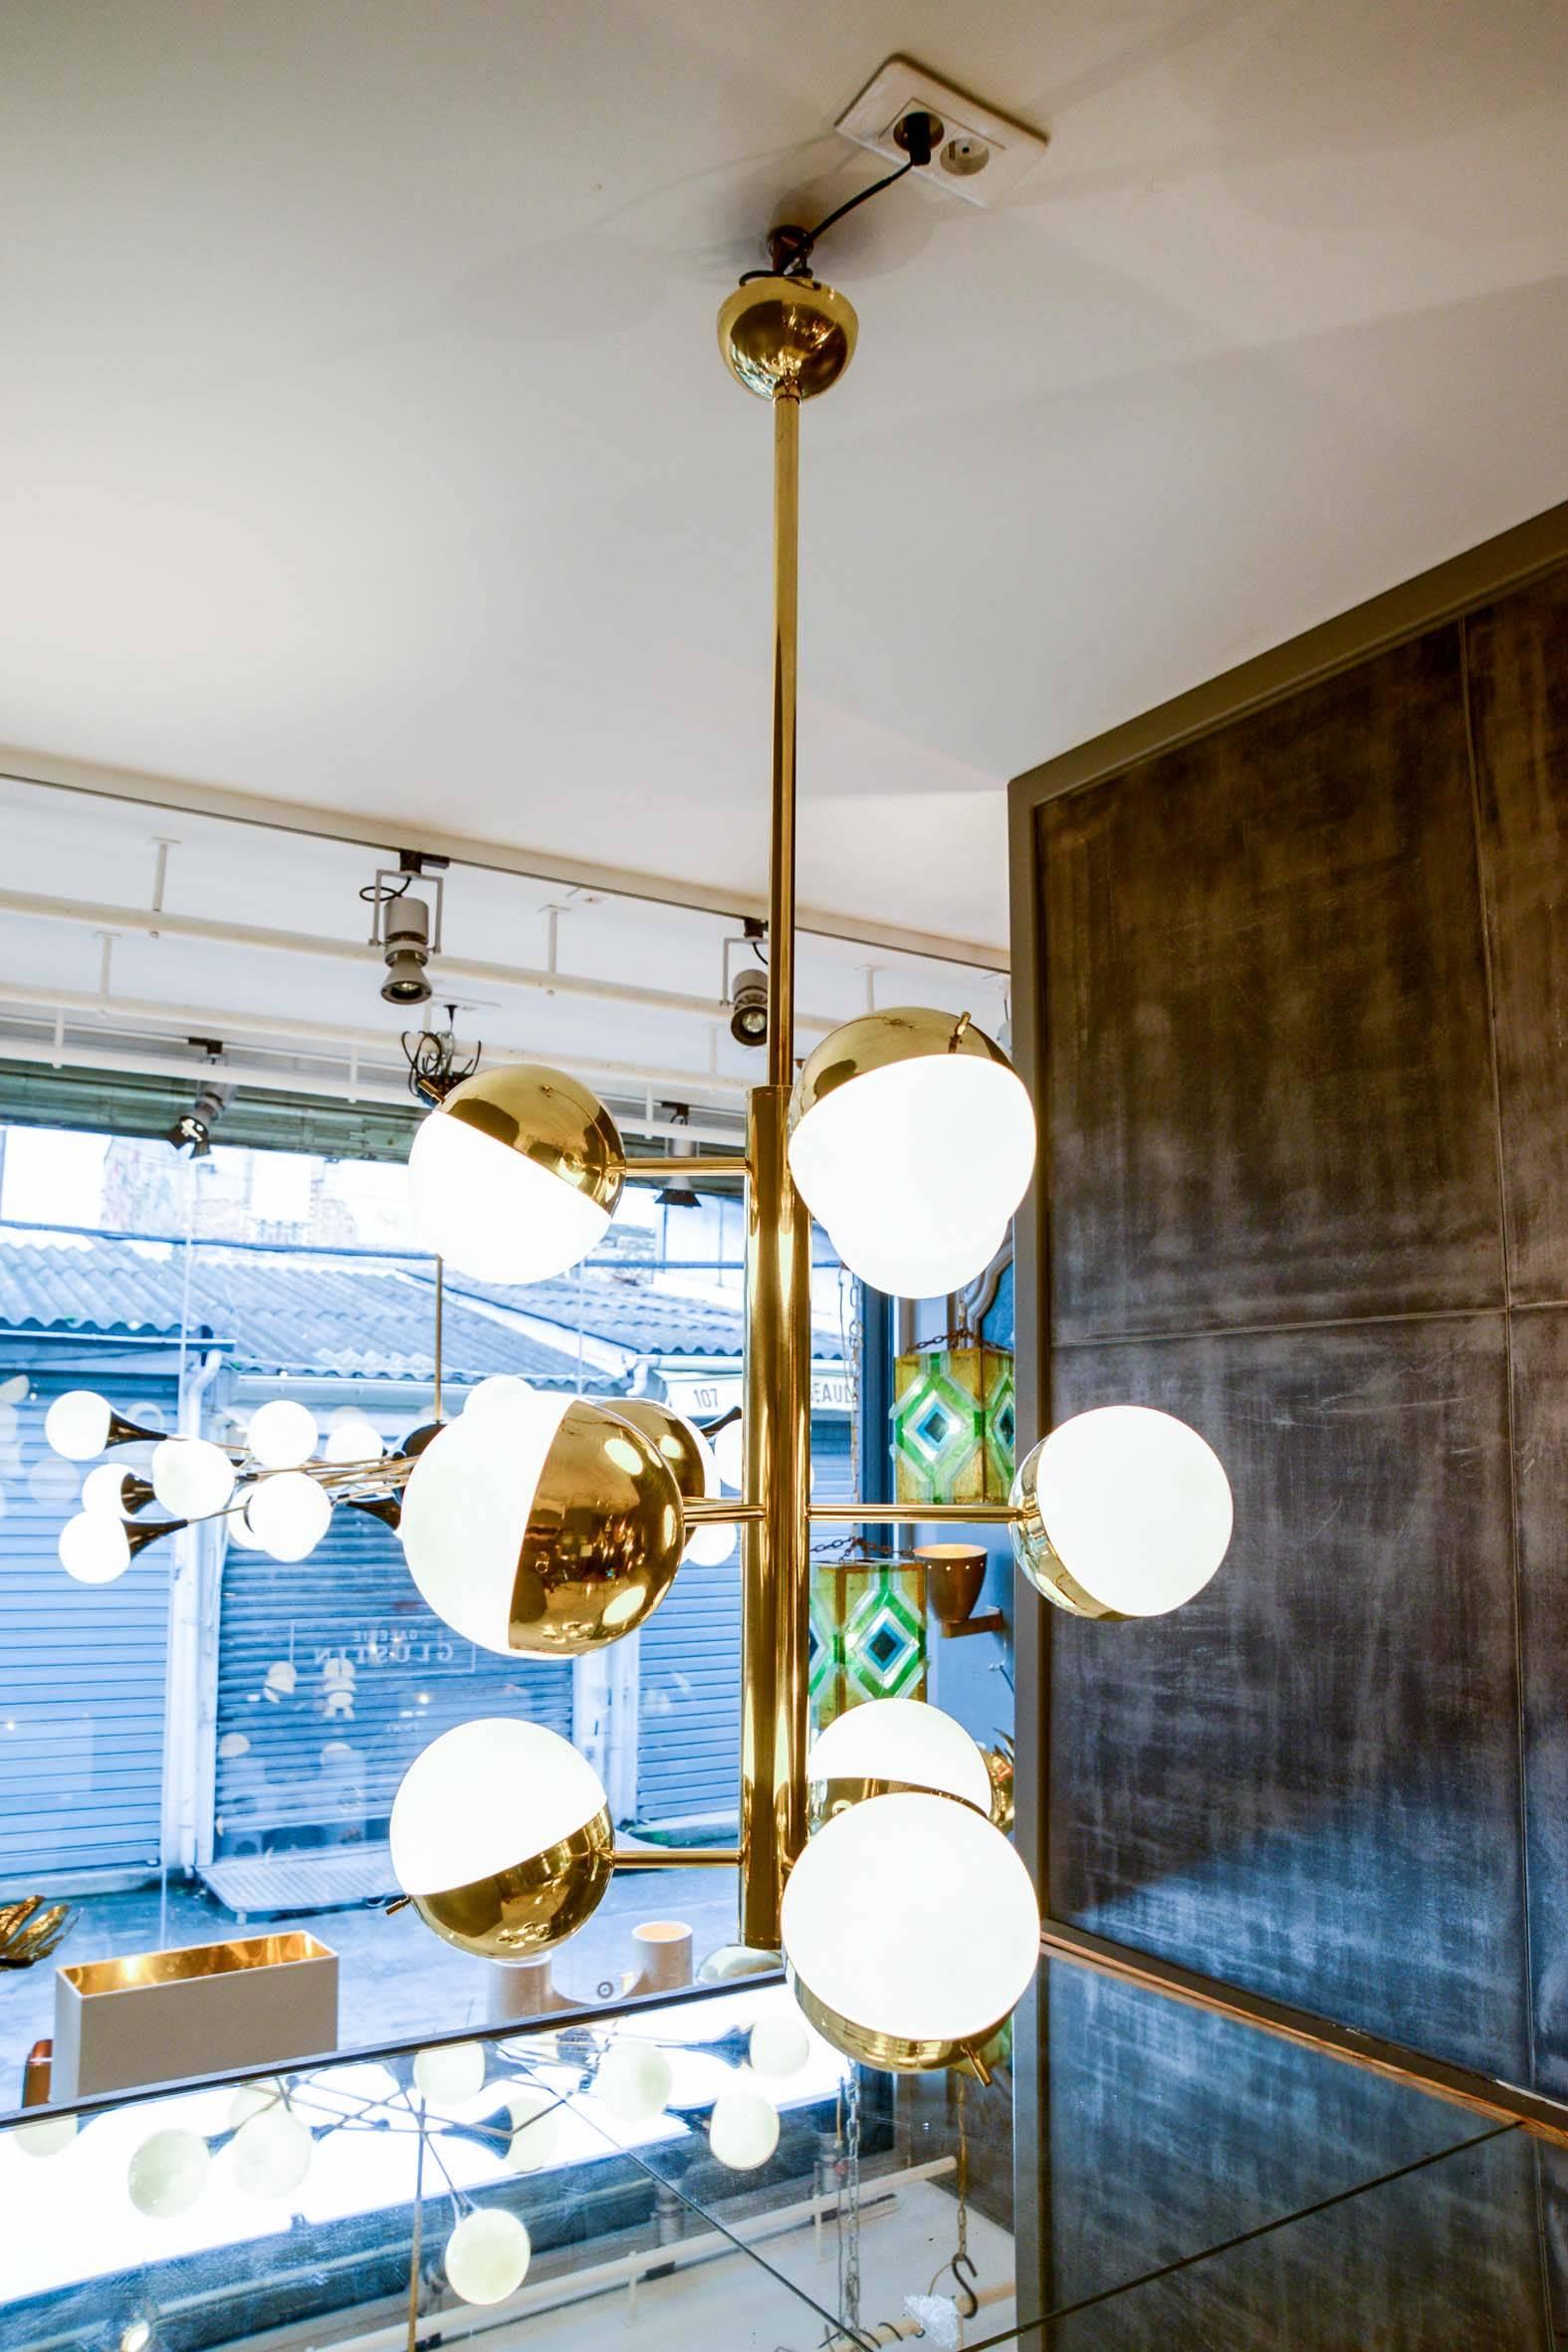 Tall suspension made of shiny brass with three levels of lights, hidden in a half brass and half glass sphere.